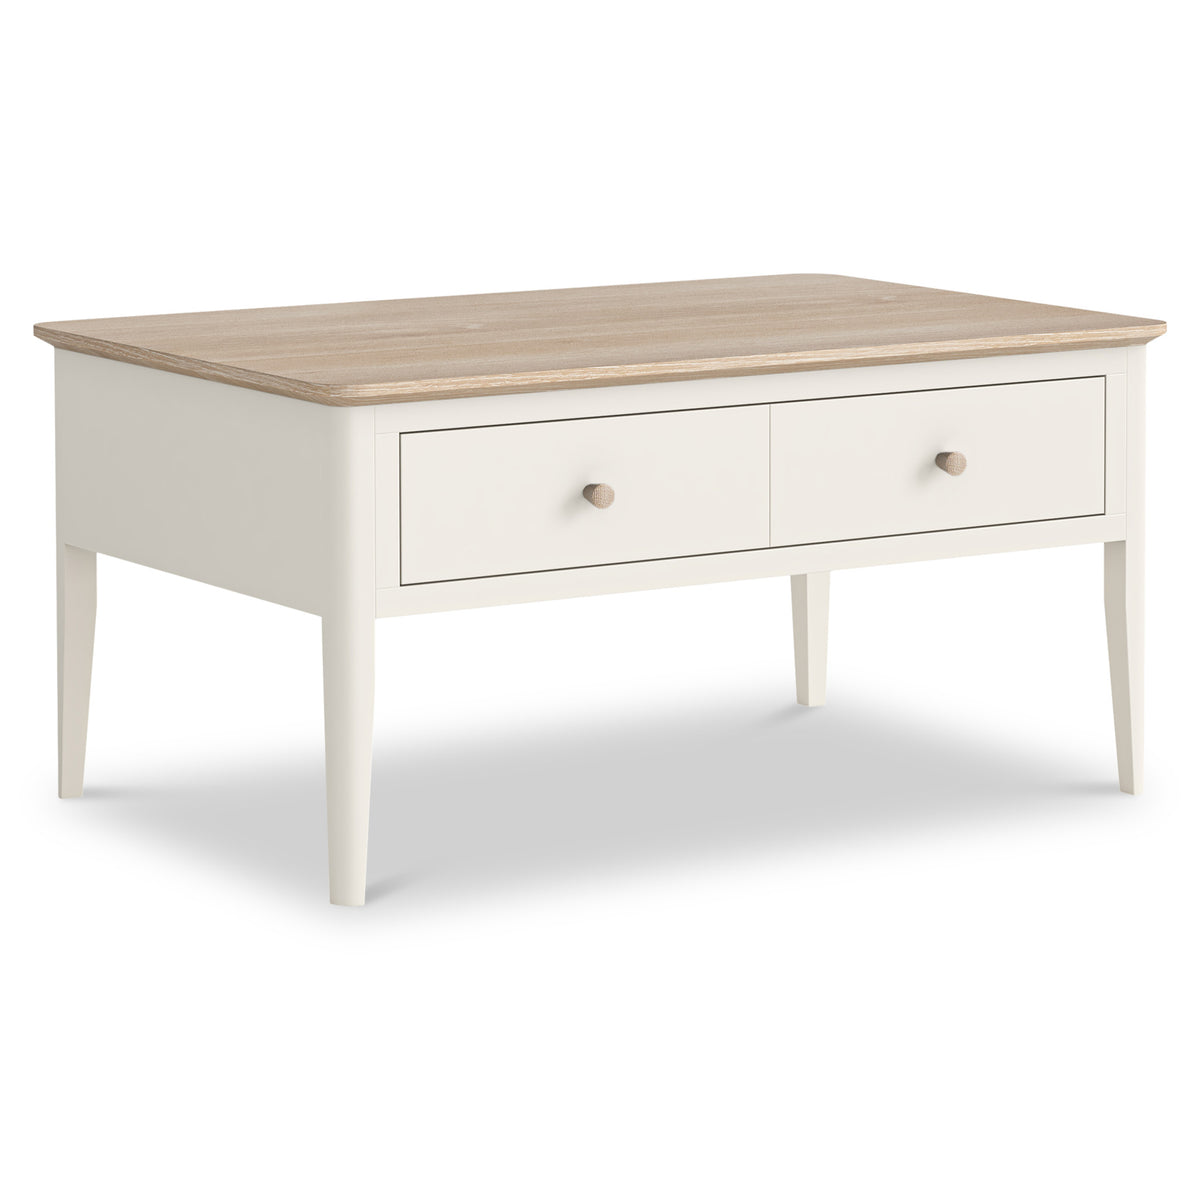 Penrose Coconut White Coffee Table with wooden handles from Roseland Furniture